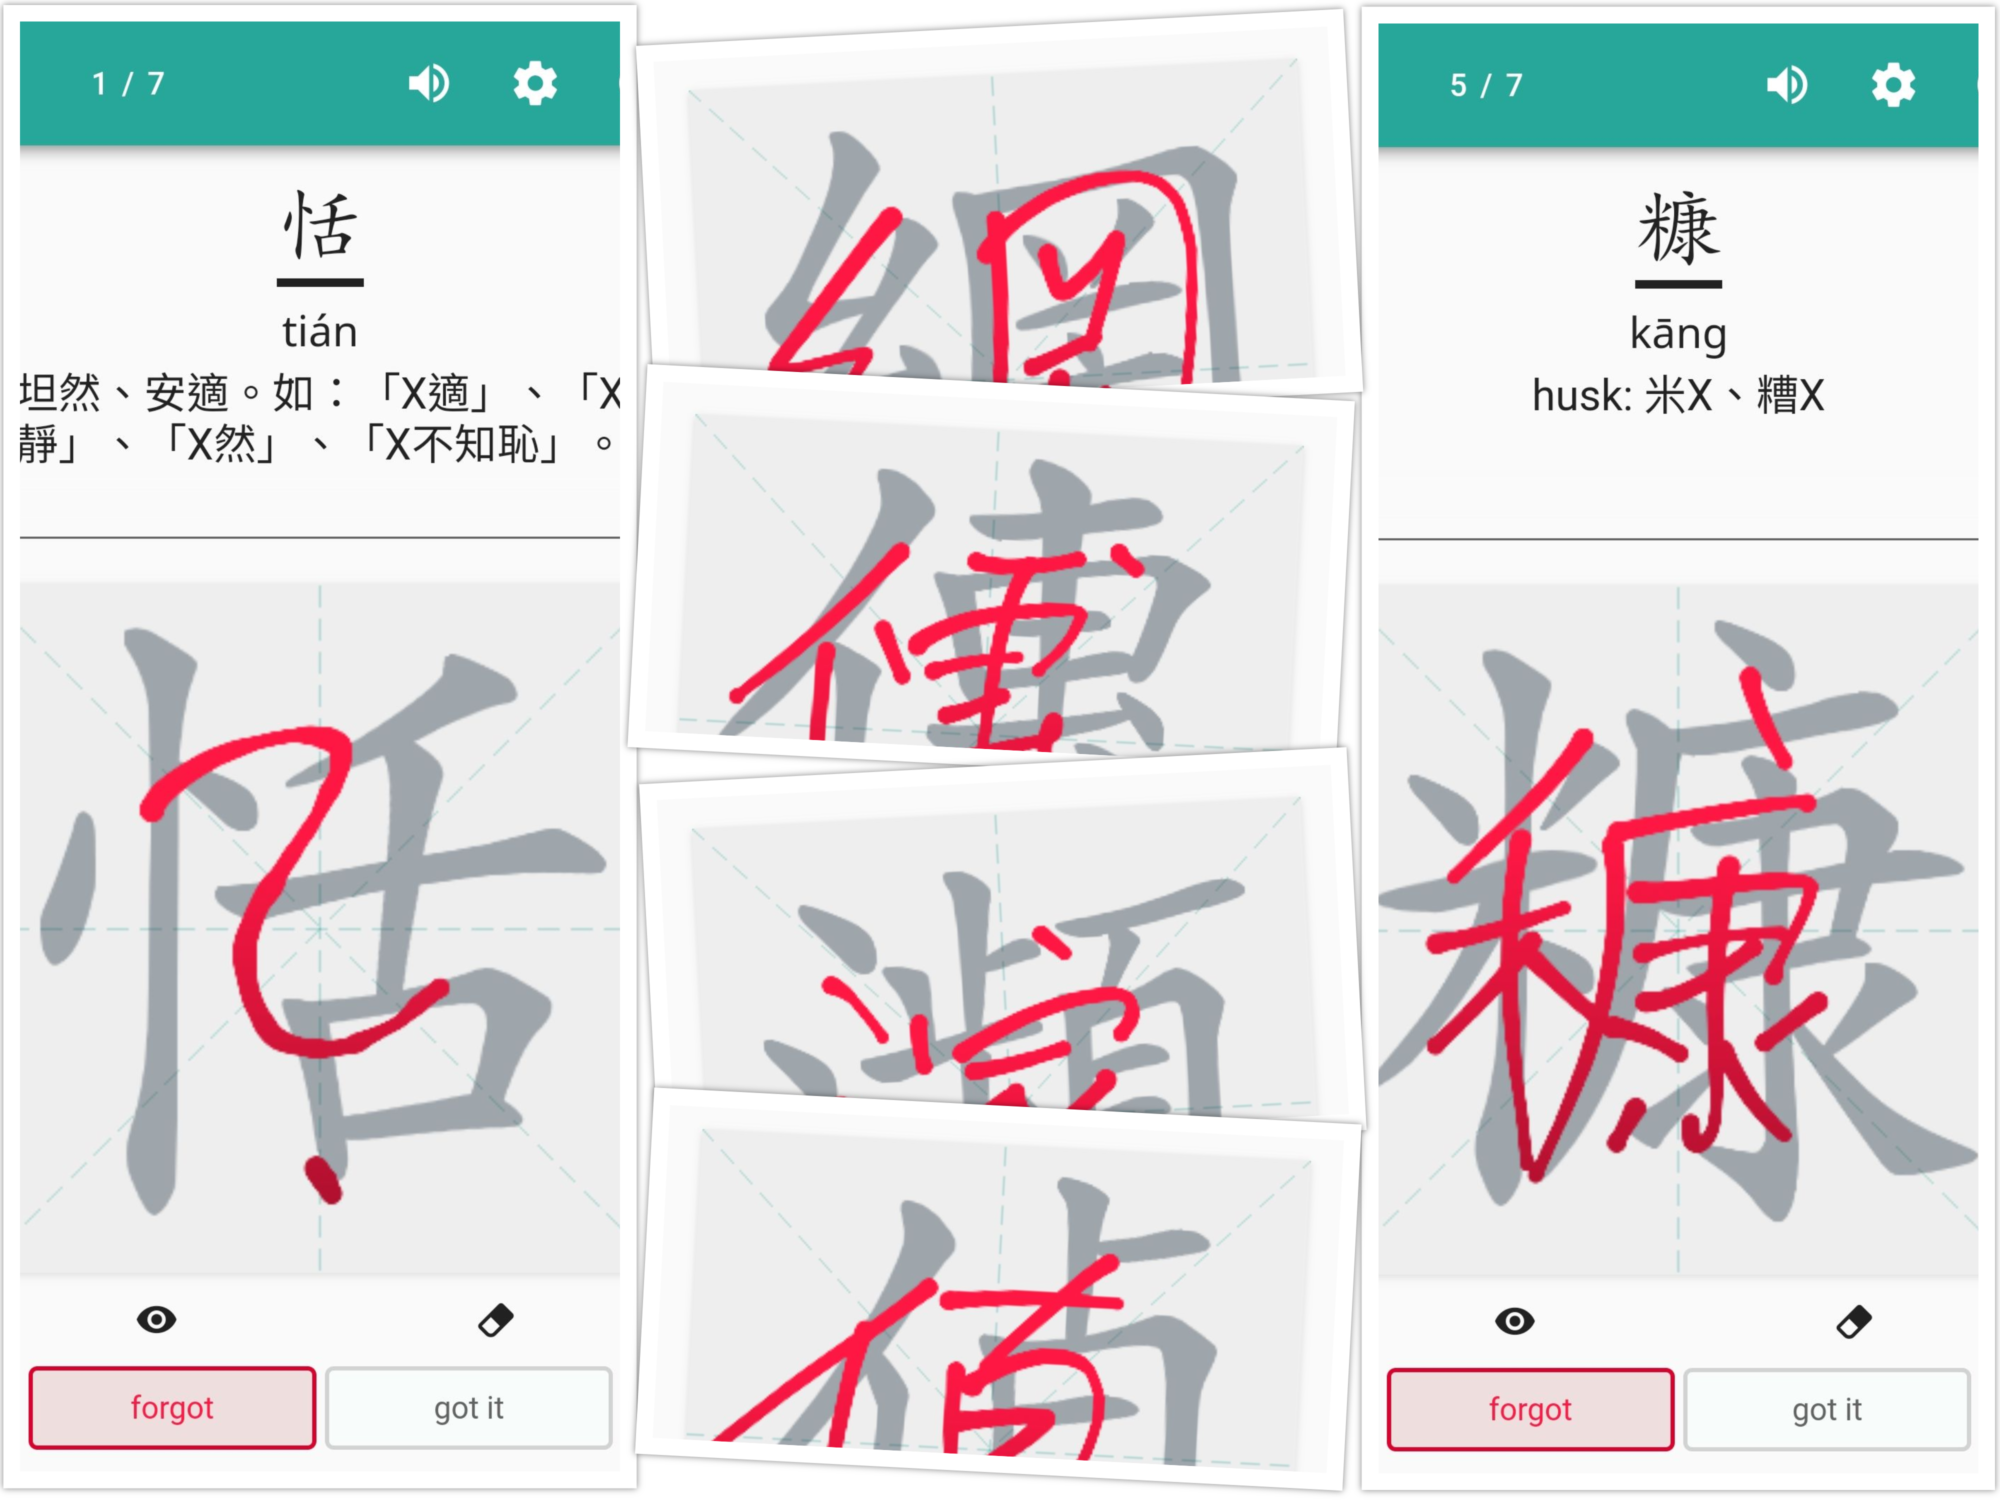 Chinese Calligraphy Dictionary - Japanese Kanji Translations - Calligraphy  Symbol, Character, Word Search